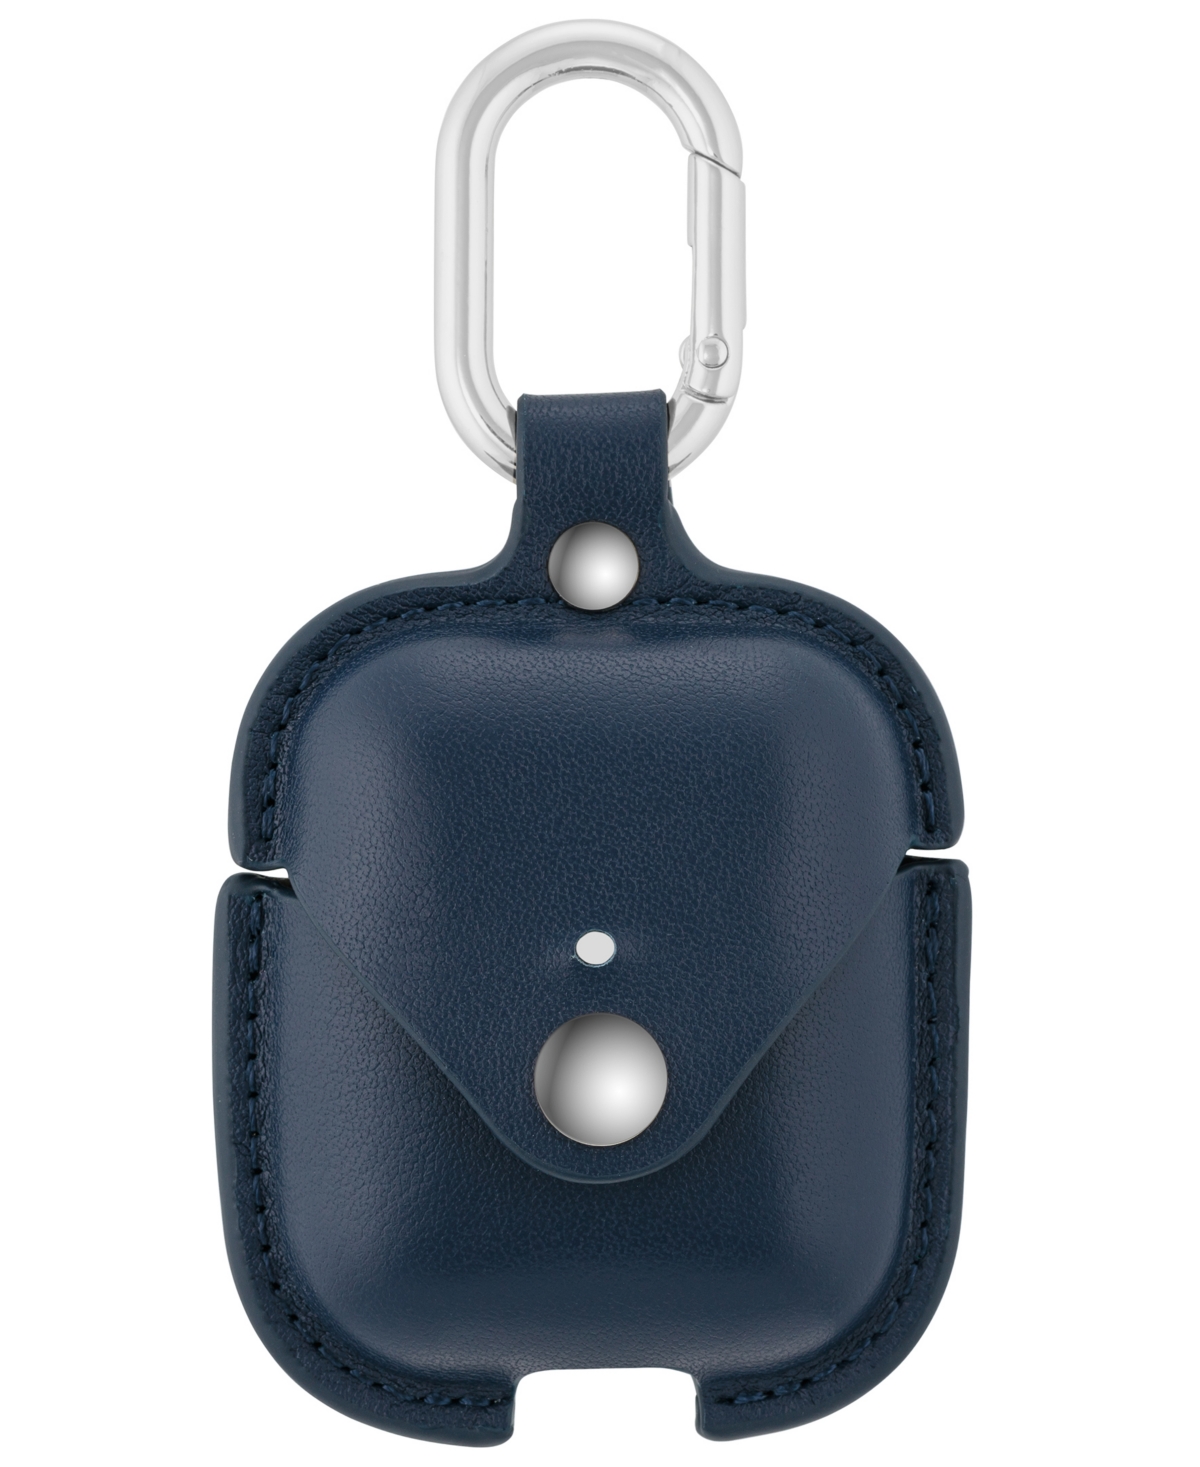 Blue Leather Apple AirPods Case with Silver-Tone Snap Closure and Carabiner Clip - Navy, Silver-Tone